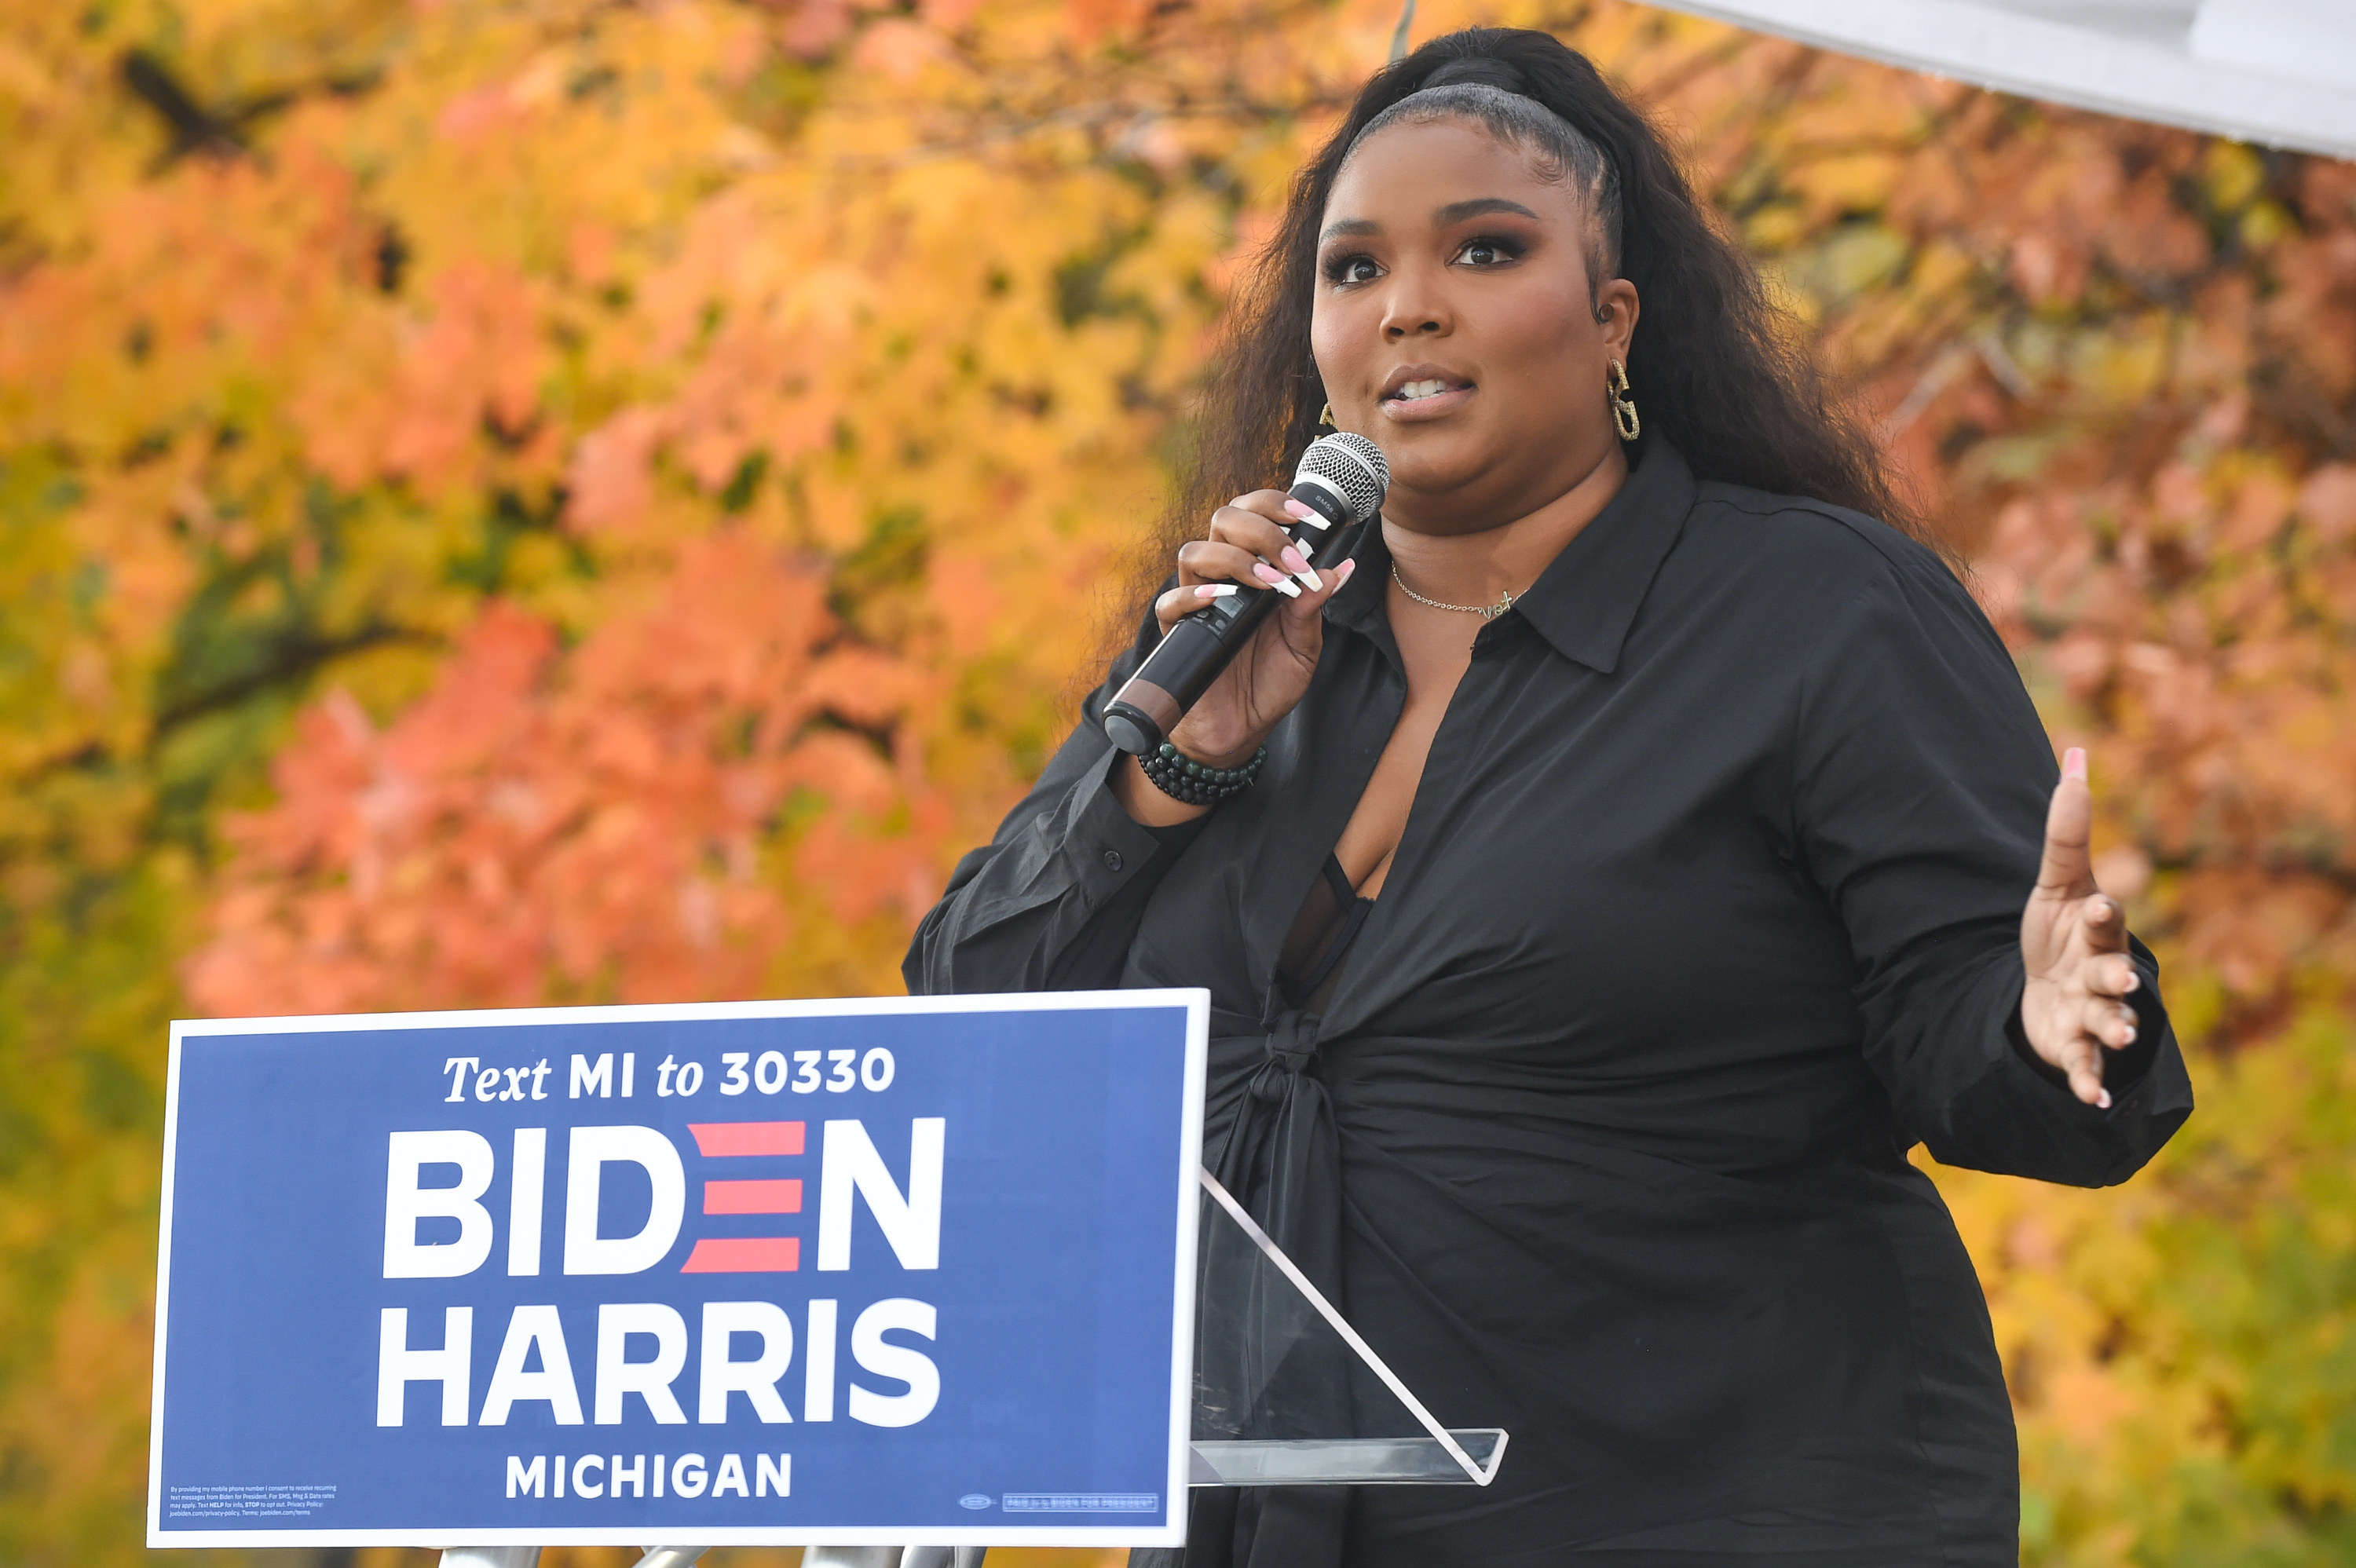 Lizzo speaking at a Michigan campaign event for Biden